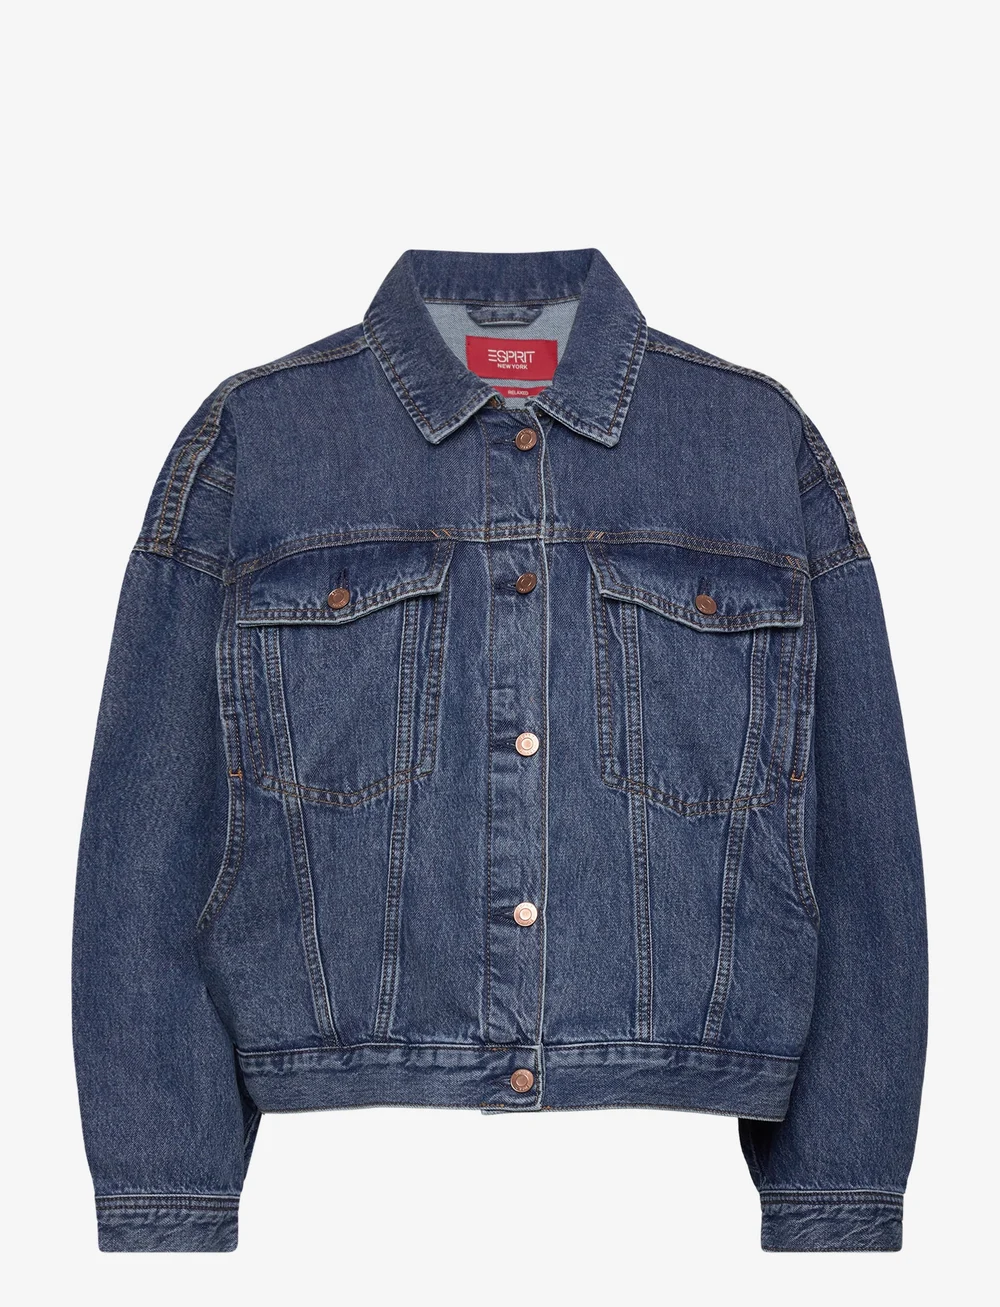 Esprit Casual Women Jackets Indoor Denim Regular - 55.00 €. Buy Denim  jackets from Esprit Casual online at Boozt.com. Fast delivery and easy  returns